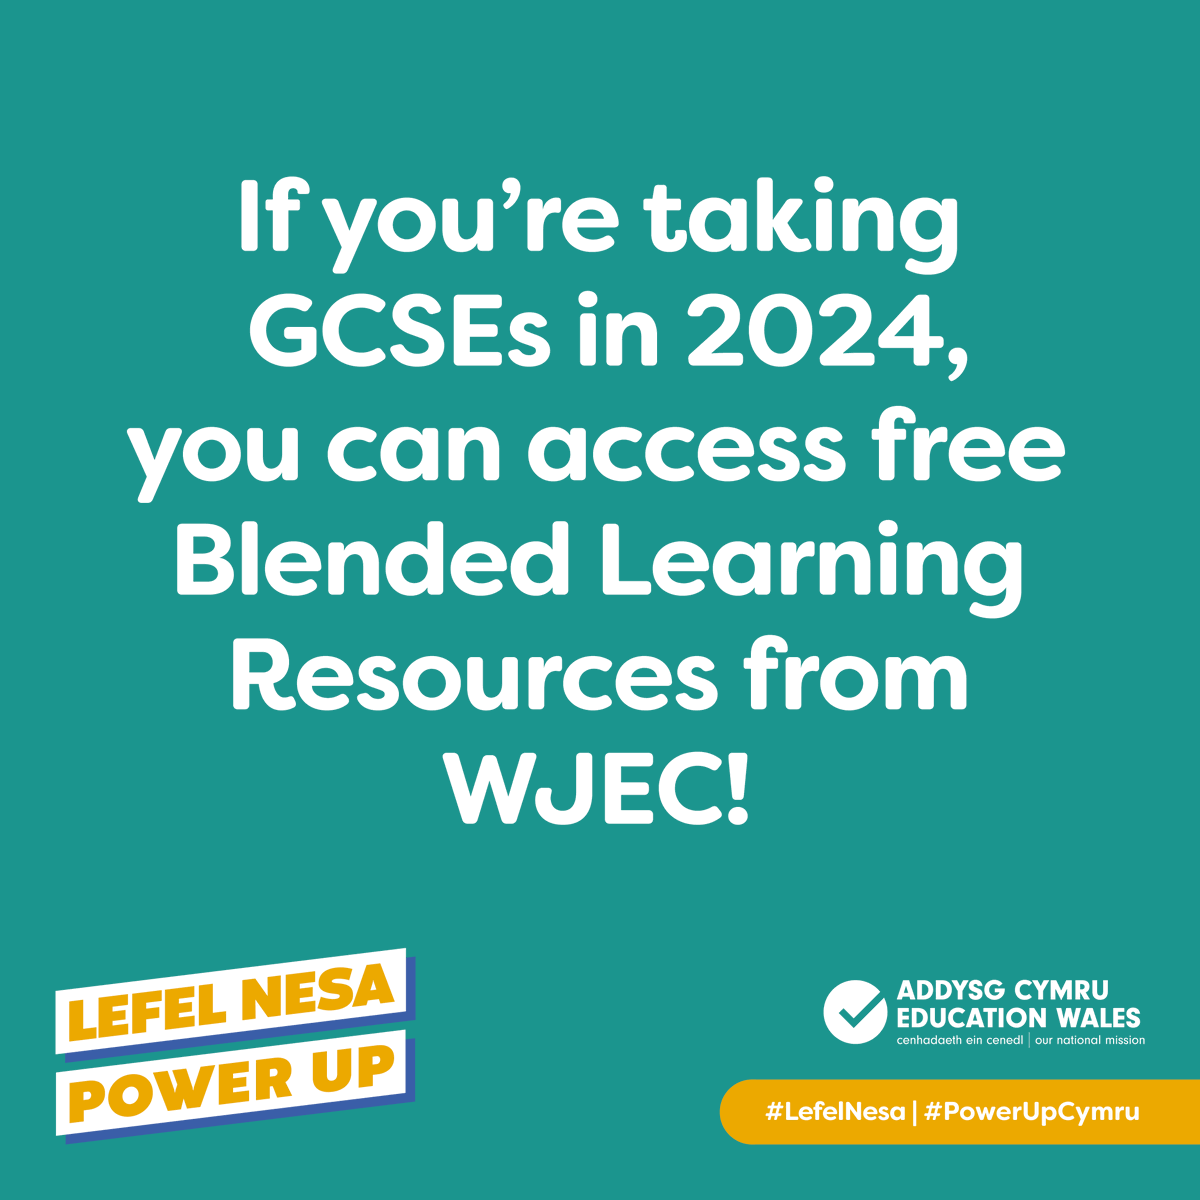 Are you taking GCSEs this year? WJEC’s Blended Learning Resources cover a wide range of subjects and can help elevate your learning! Head to gov.wales/powerup to find out more. #PowerUpCymru @CompPorthcawl @yggllangynwyd @HeronsbridgeSch @YBCBridgend @BridgePRU